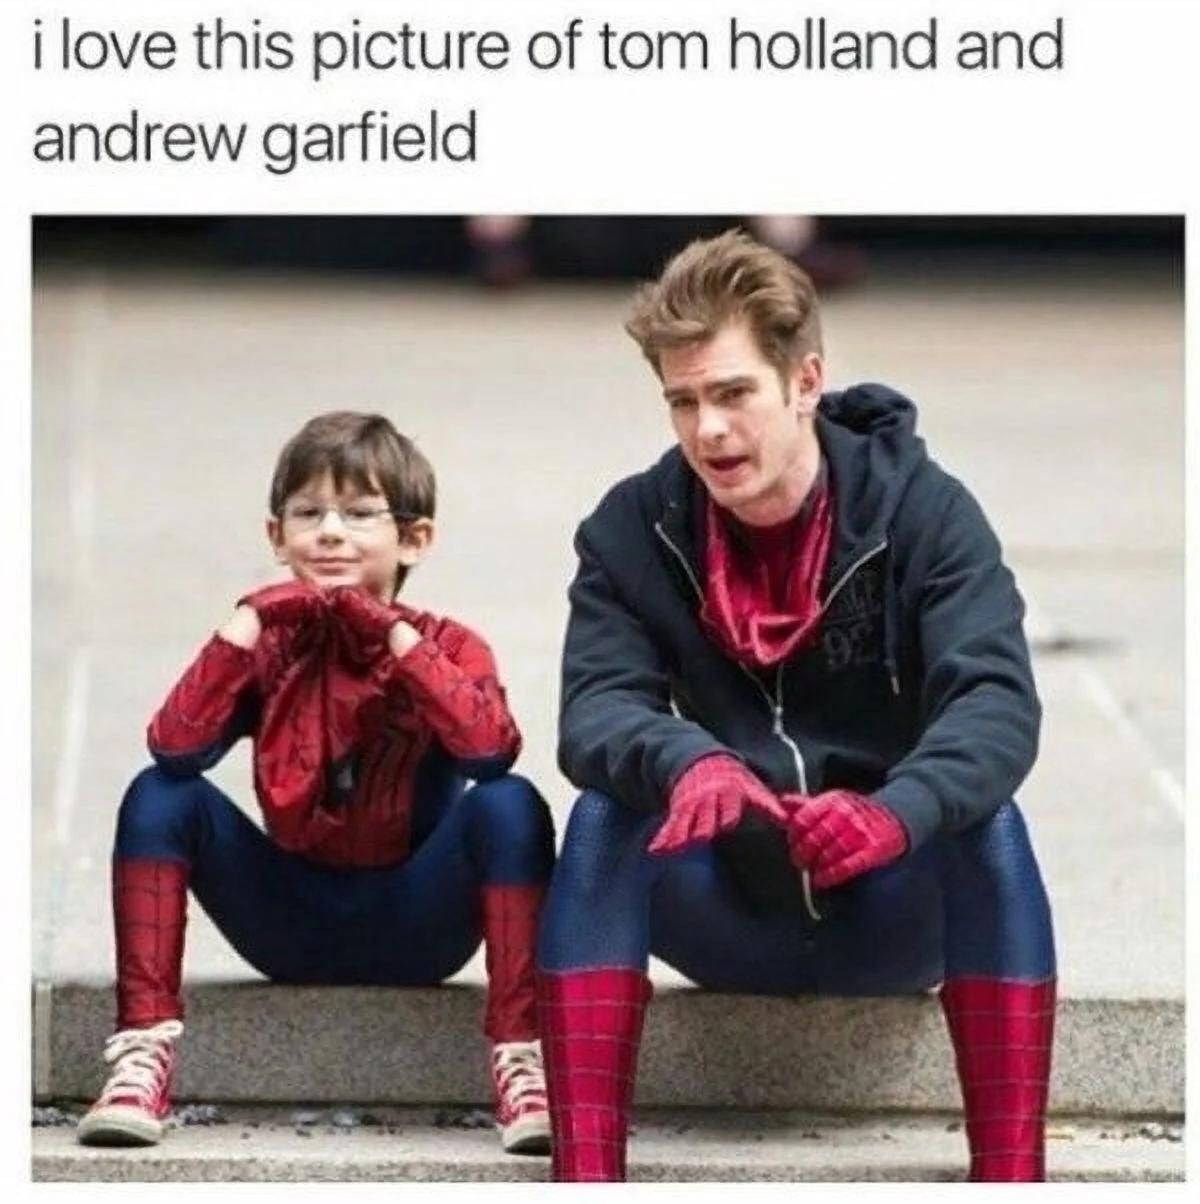 A meme about Andrew Garfield's Spider-Man.